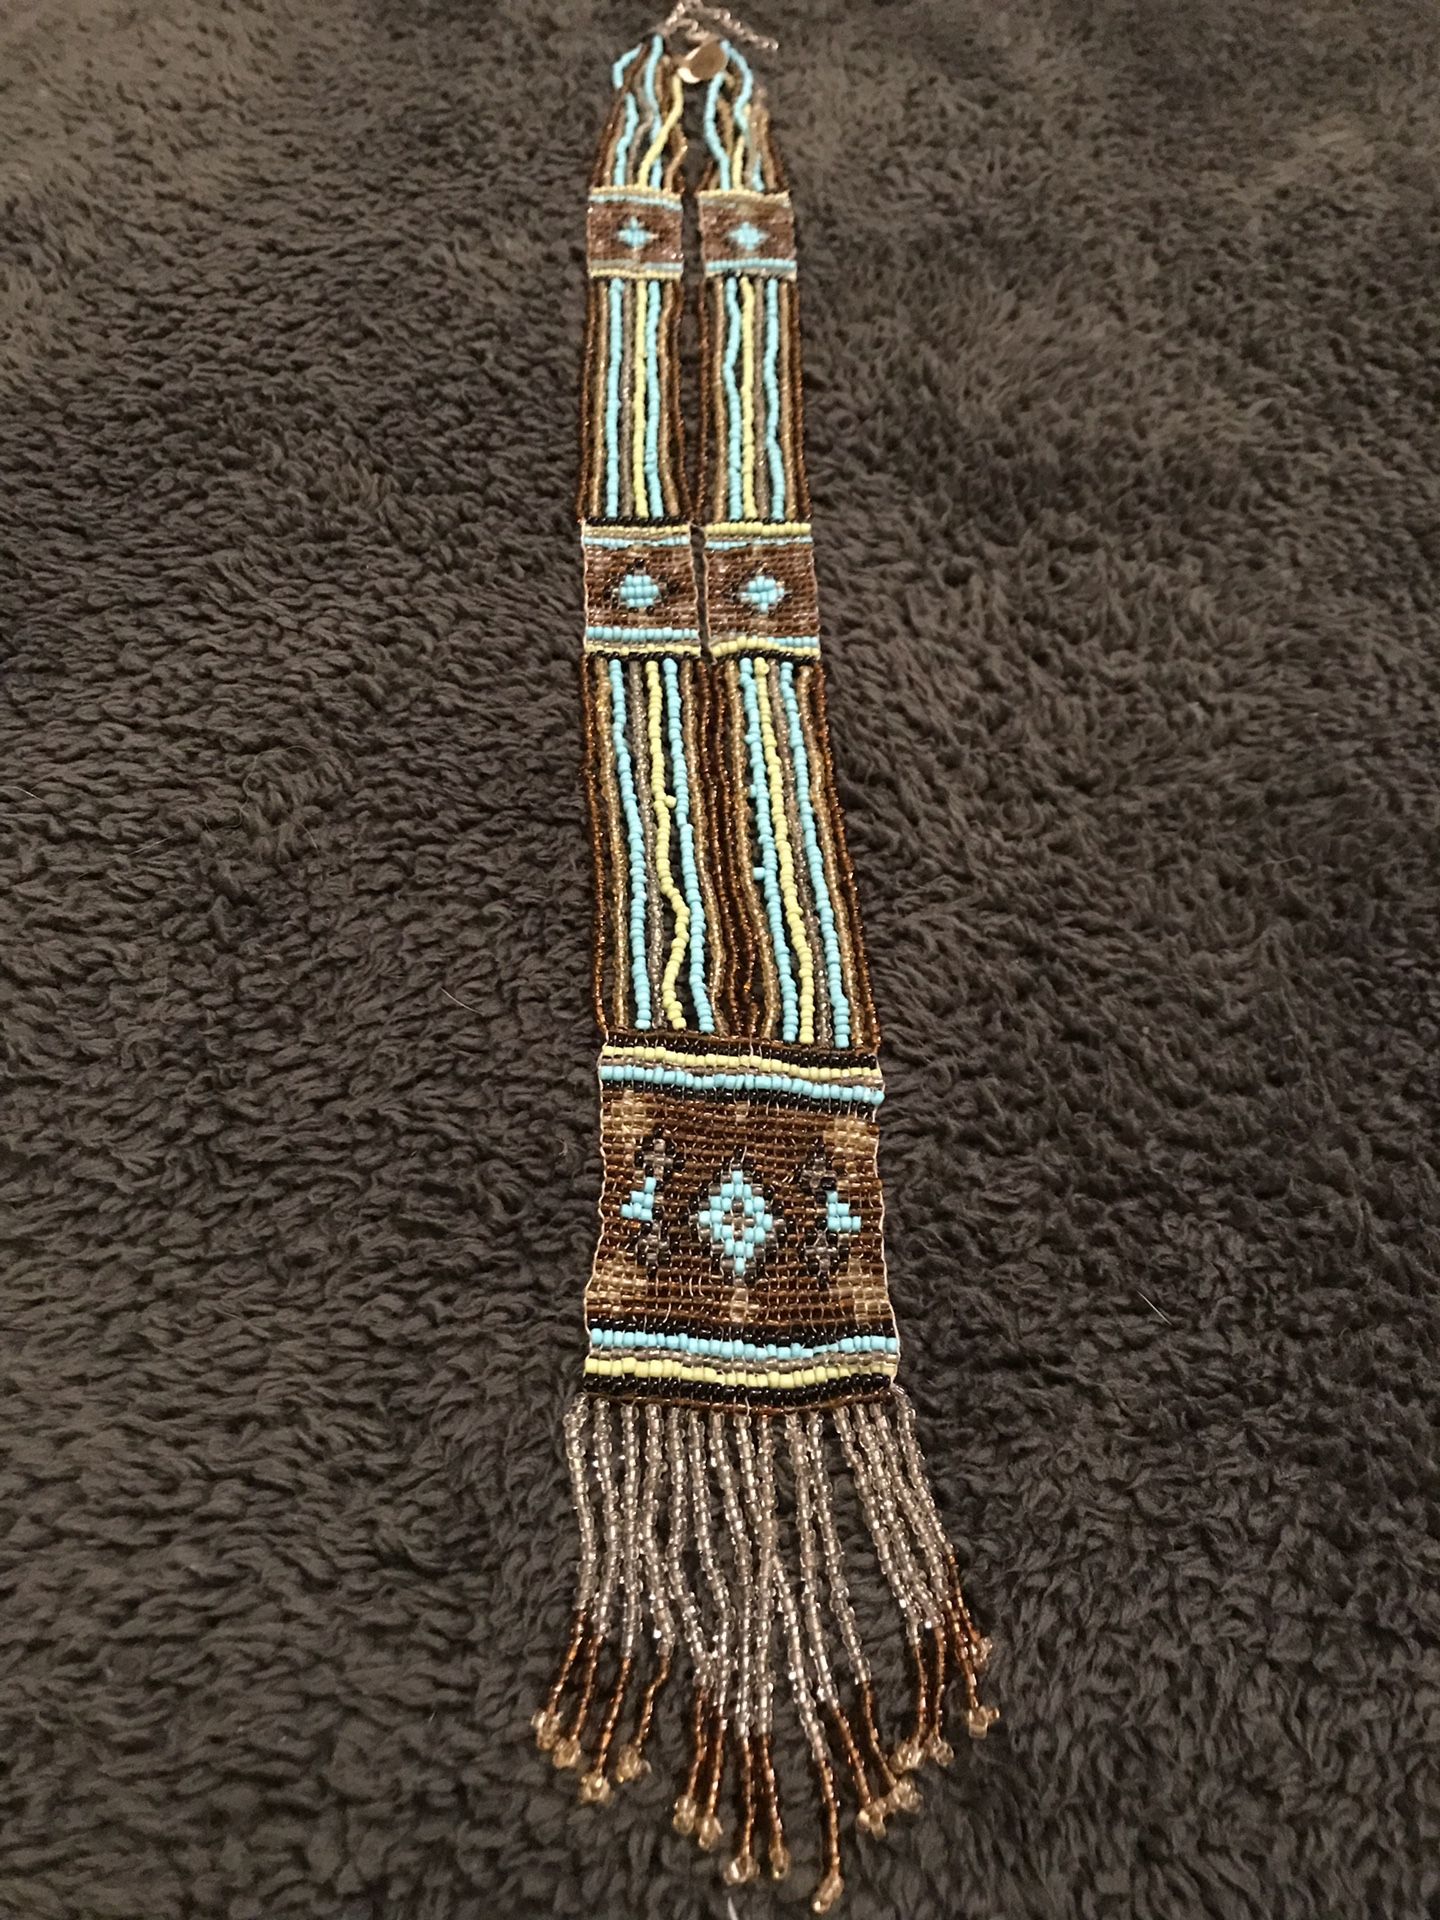 Breathtaking Native American beaded necklace